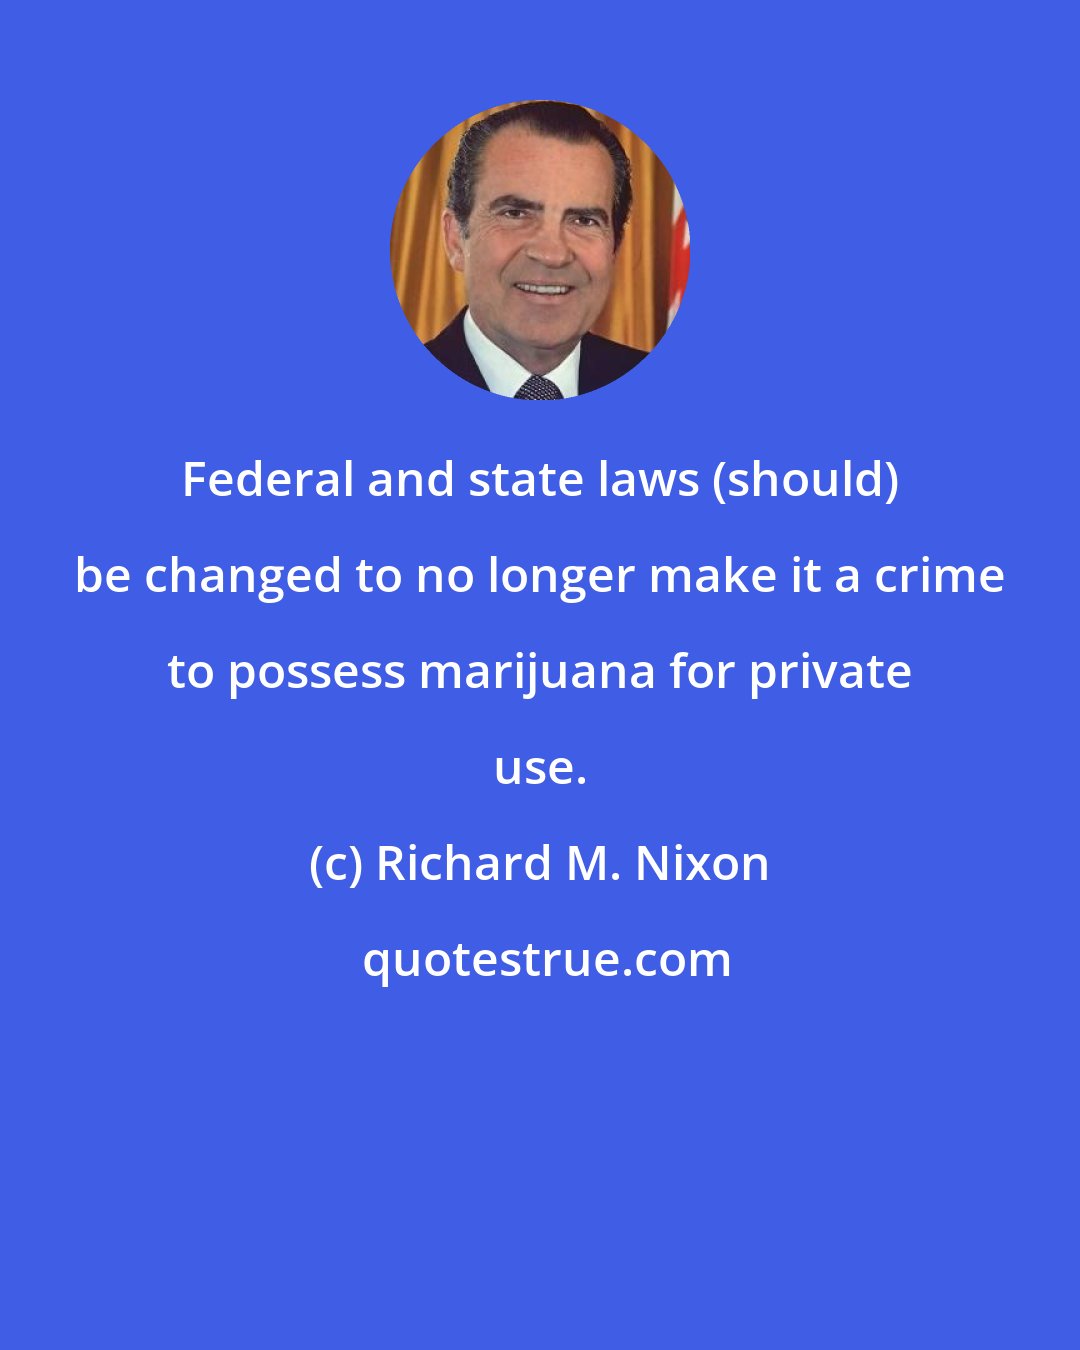 Richard M. Nixon: Federal and state laws (should) be changed to no longer make it a crime to possess marijuana for private use.